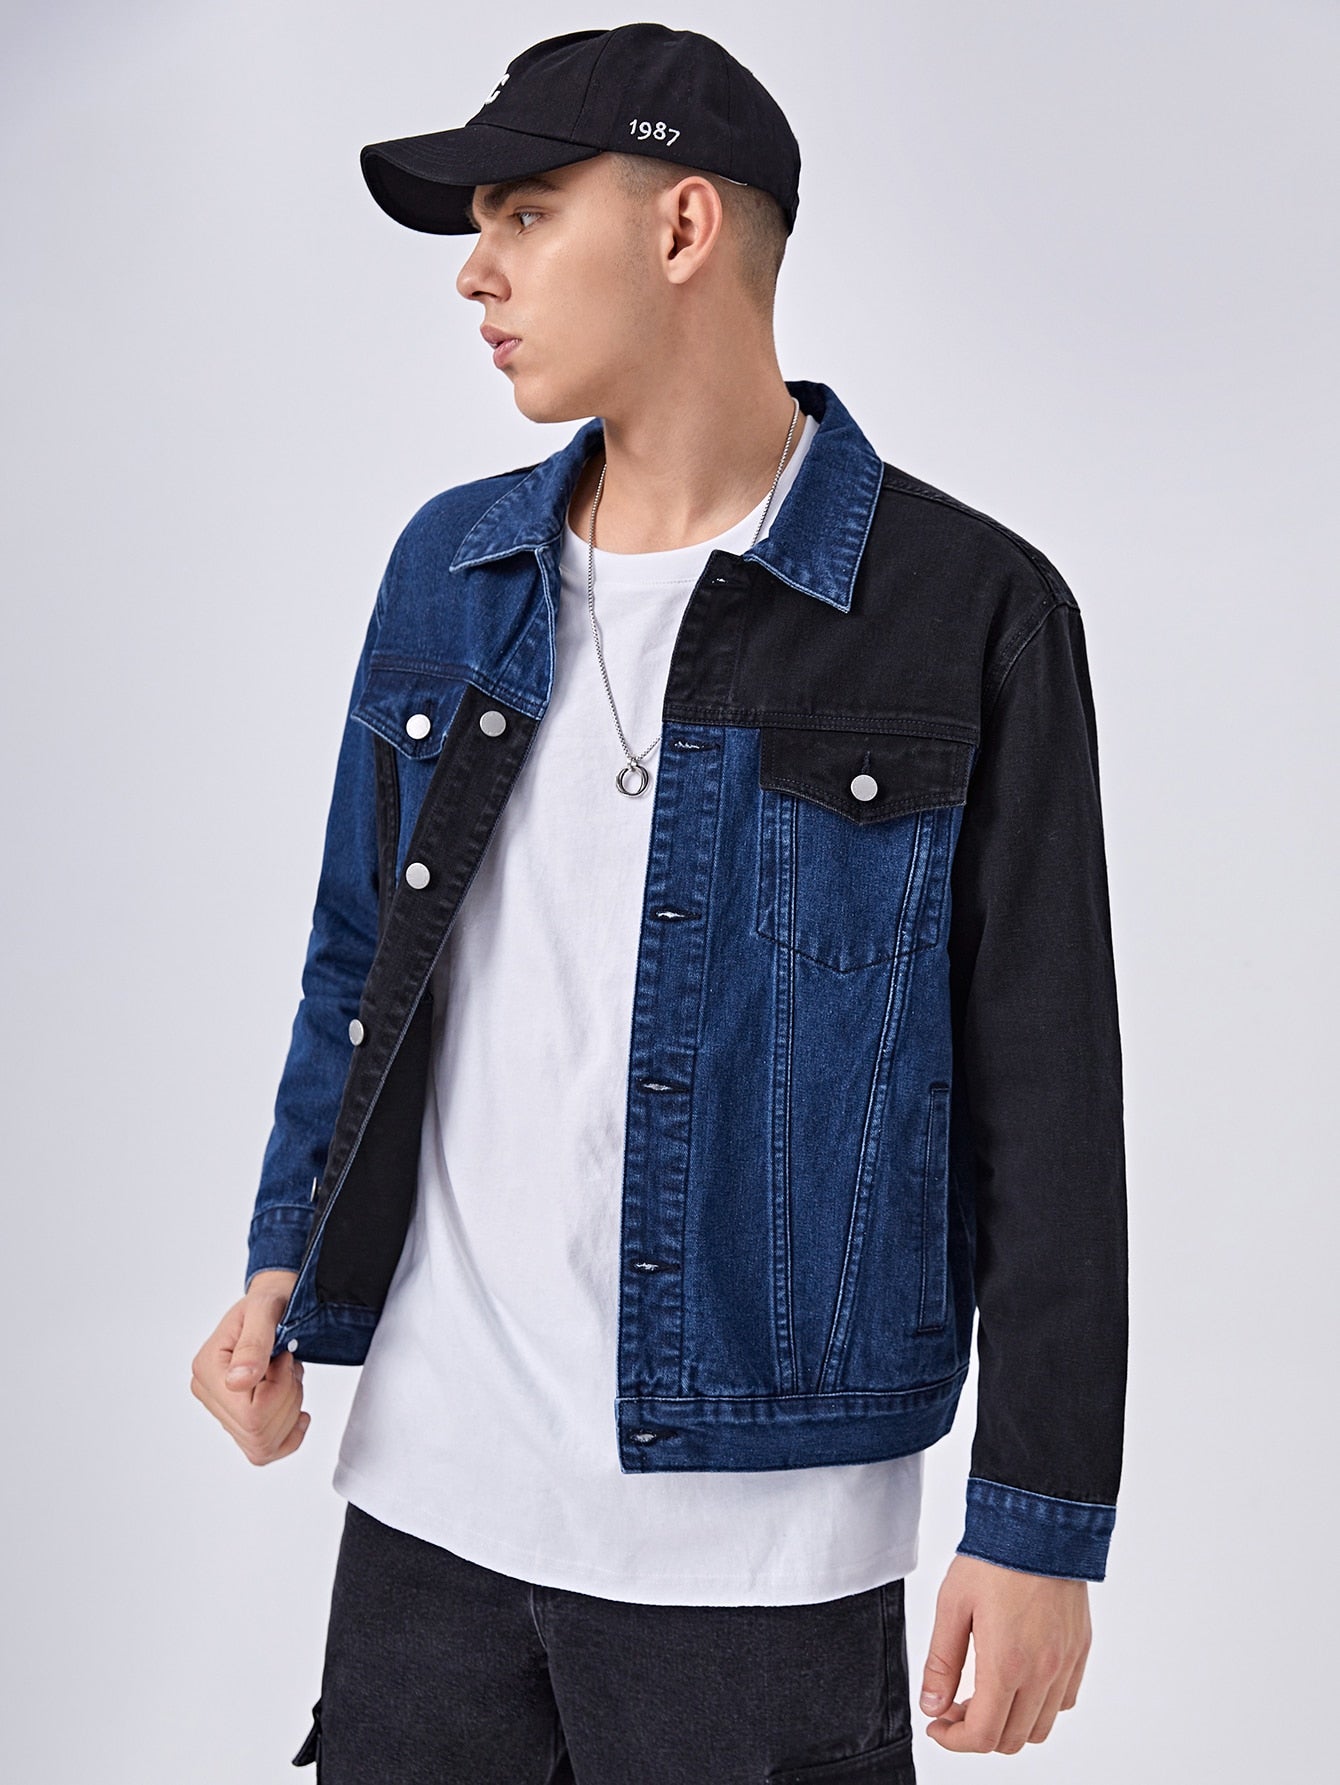 Dropship Chic New Loose Red And White Two-Tone Denim Jacket Youth Casual  Ripped to Sell Online at a Lower Price | Doba